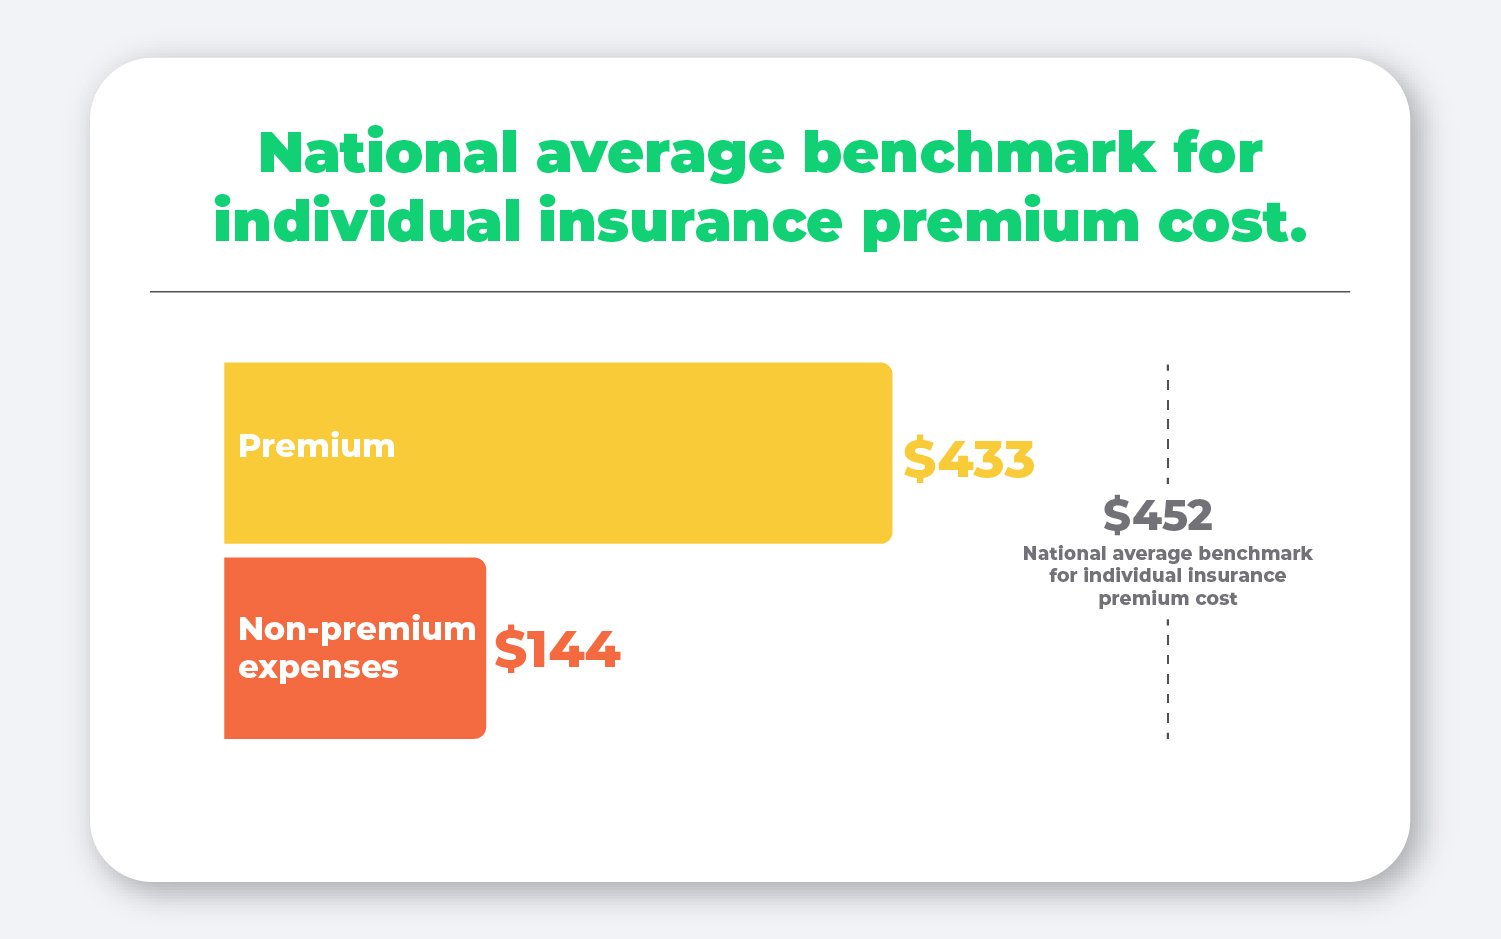 National average benchmark for individual insurance premium cost.